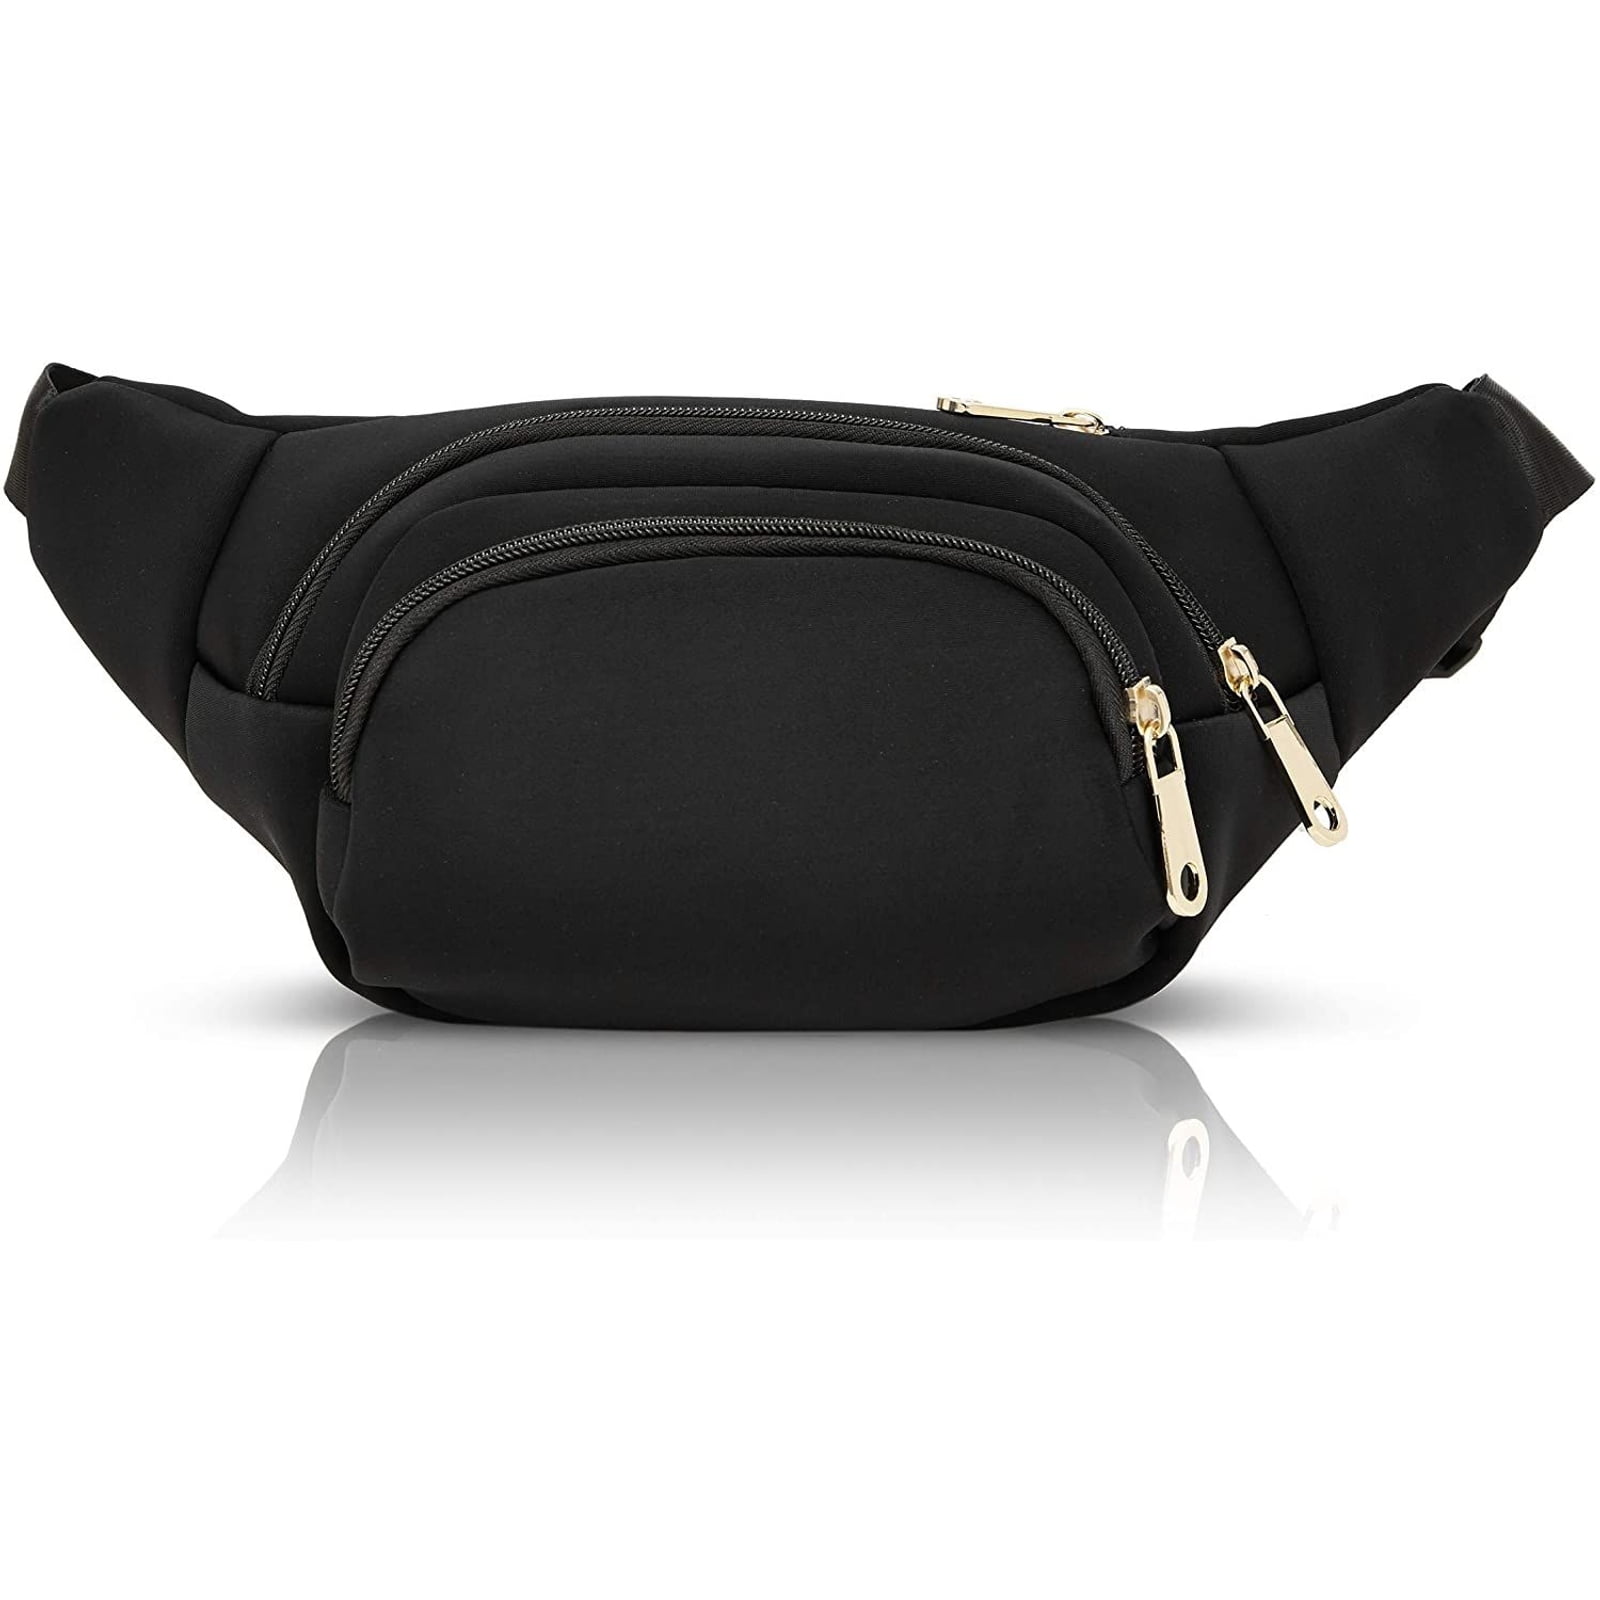 Size Black Fanny Pack, Crossbody Bag with Adjustable Belt Straps Fits 34-60 Inch Waist (Expands to 5XL) - Walmart.com